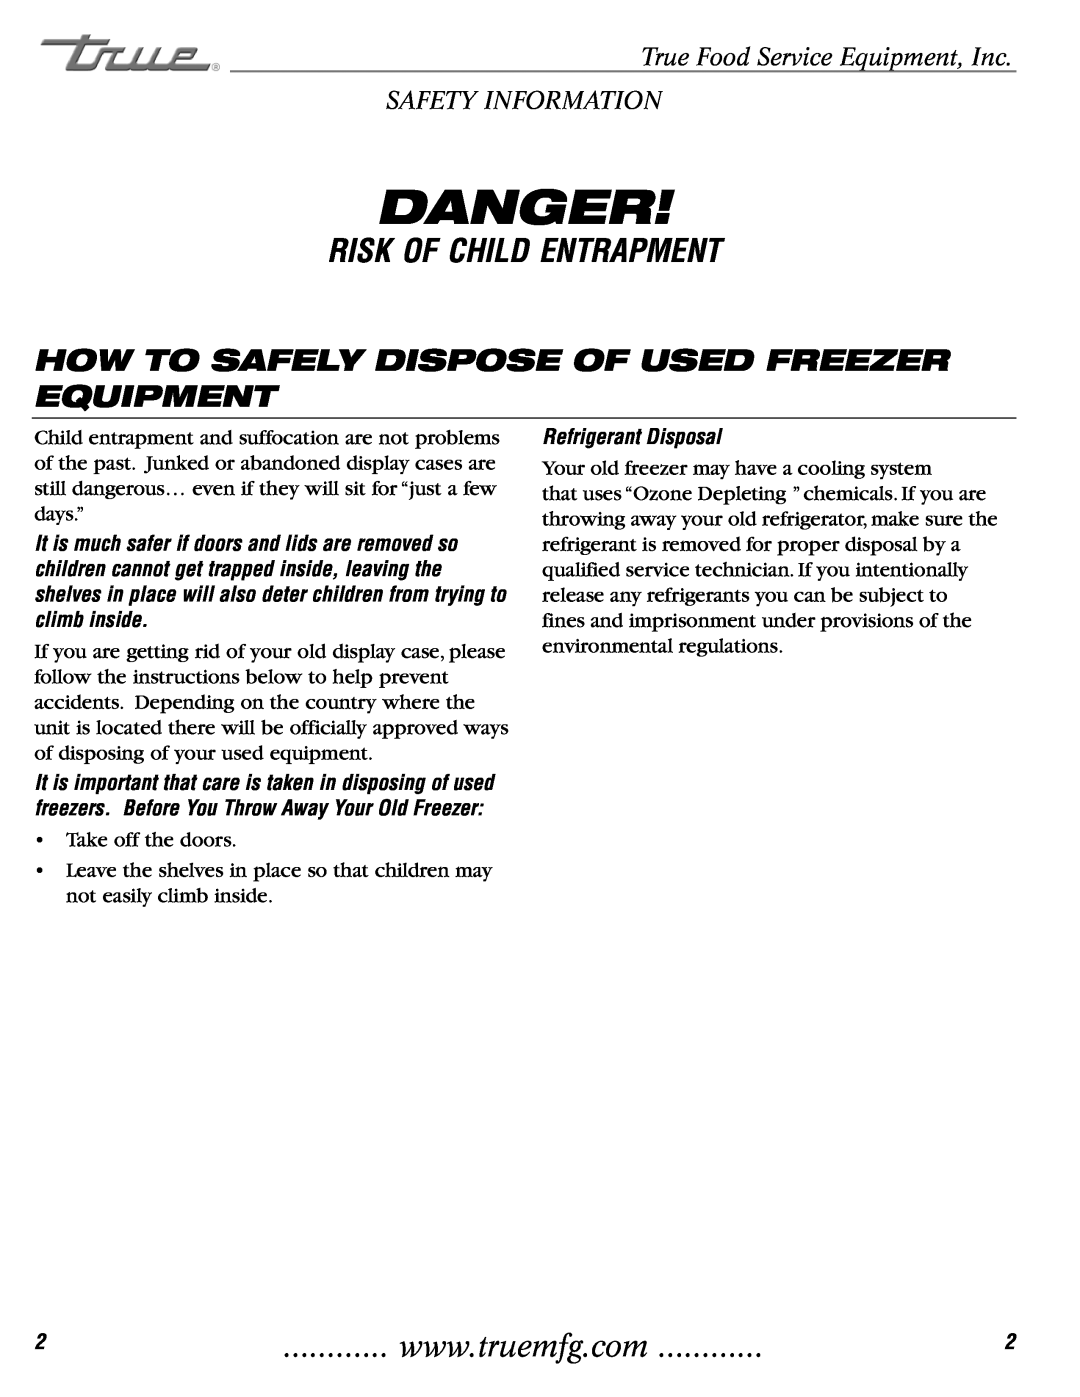 True Manufacturing Company TDC-47, THDC-6 How To Safely Dispose Of Used Freezer Equipment, Refrigerant Disposal, Danger 